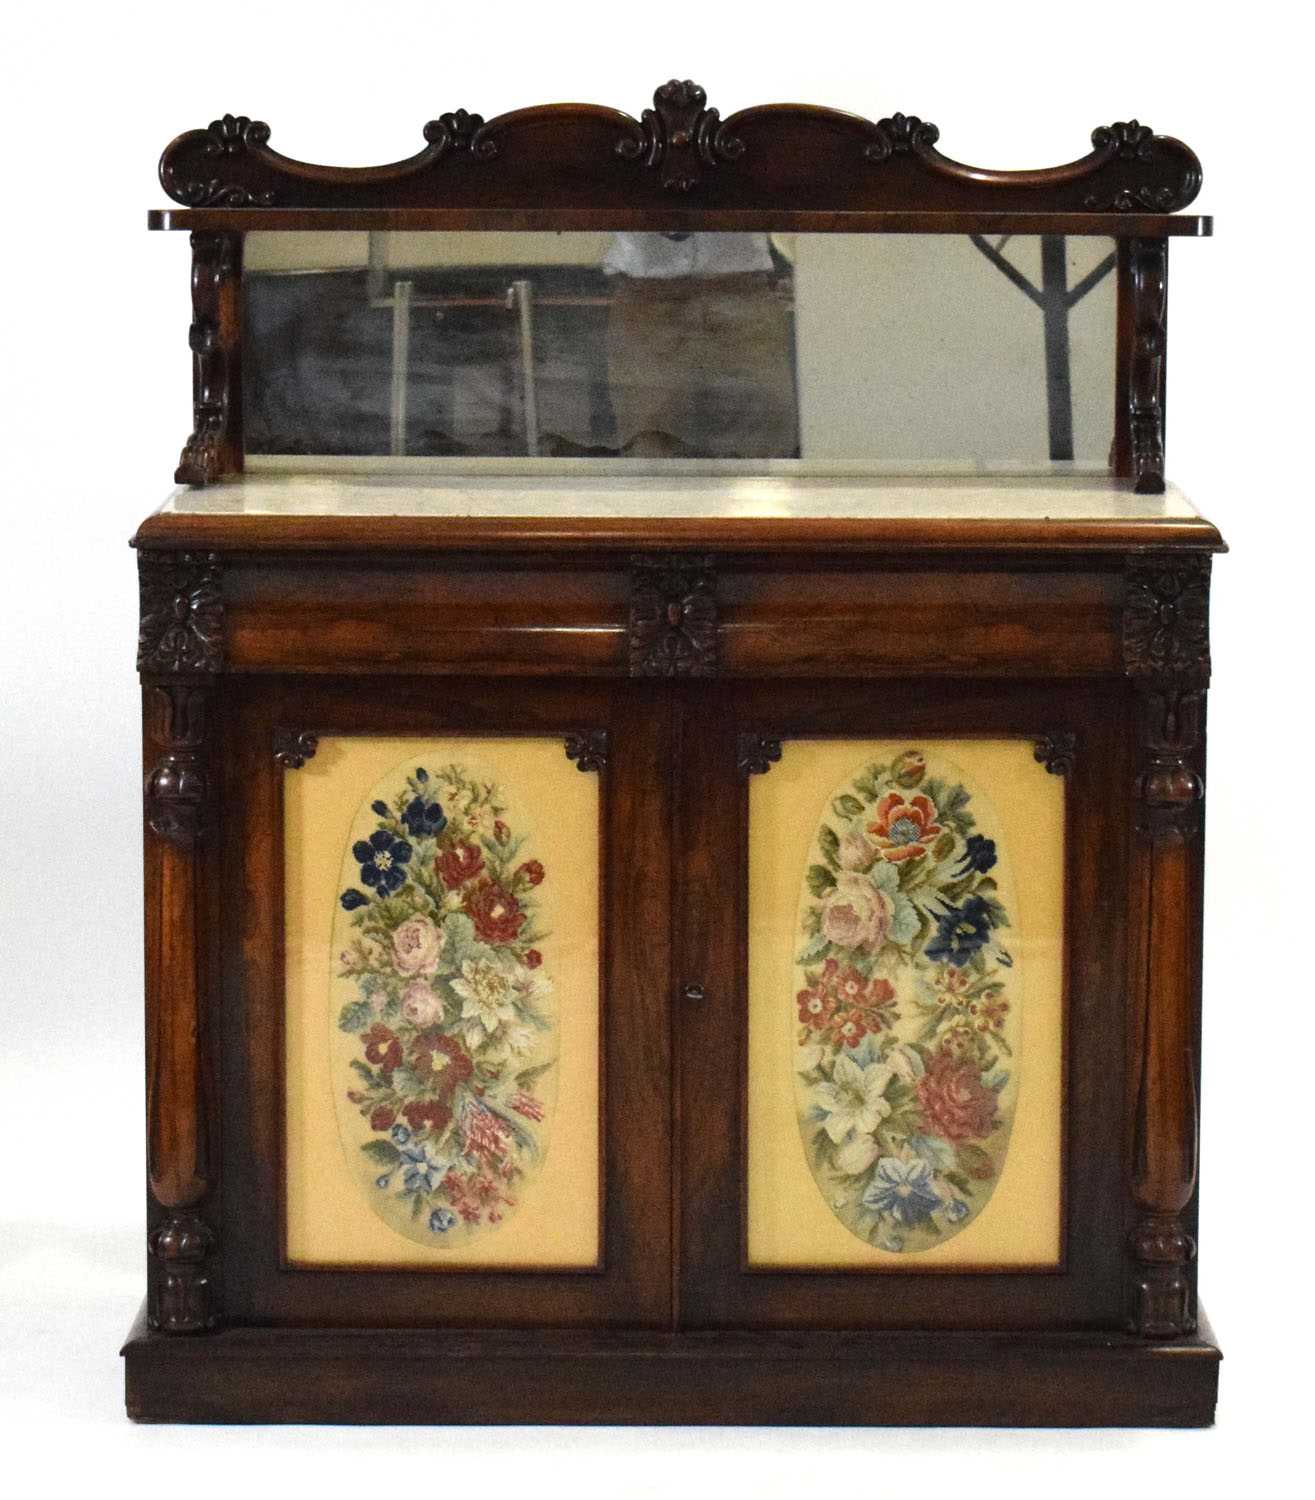 An early 19th century rosewood chiffonier, the mirrored superstructure over a marble surface and